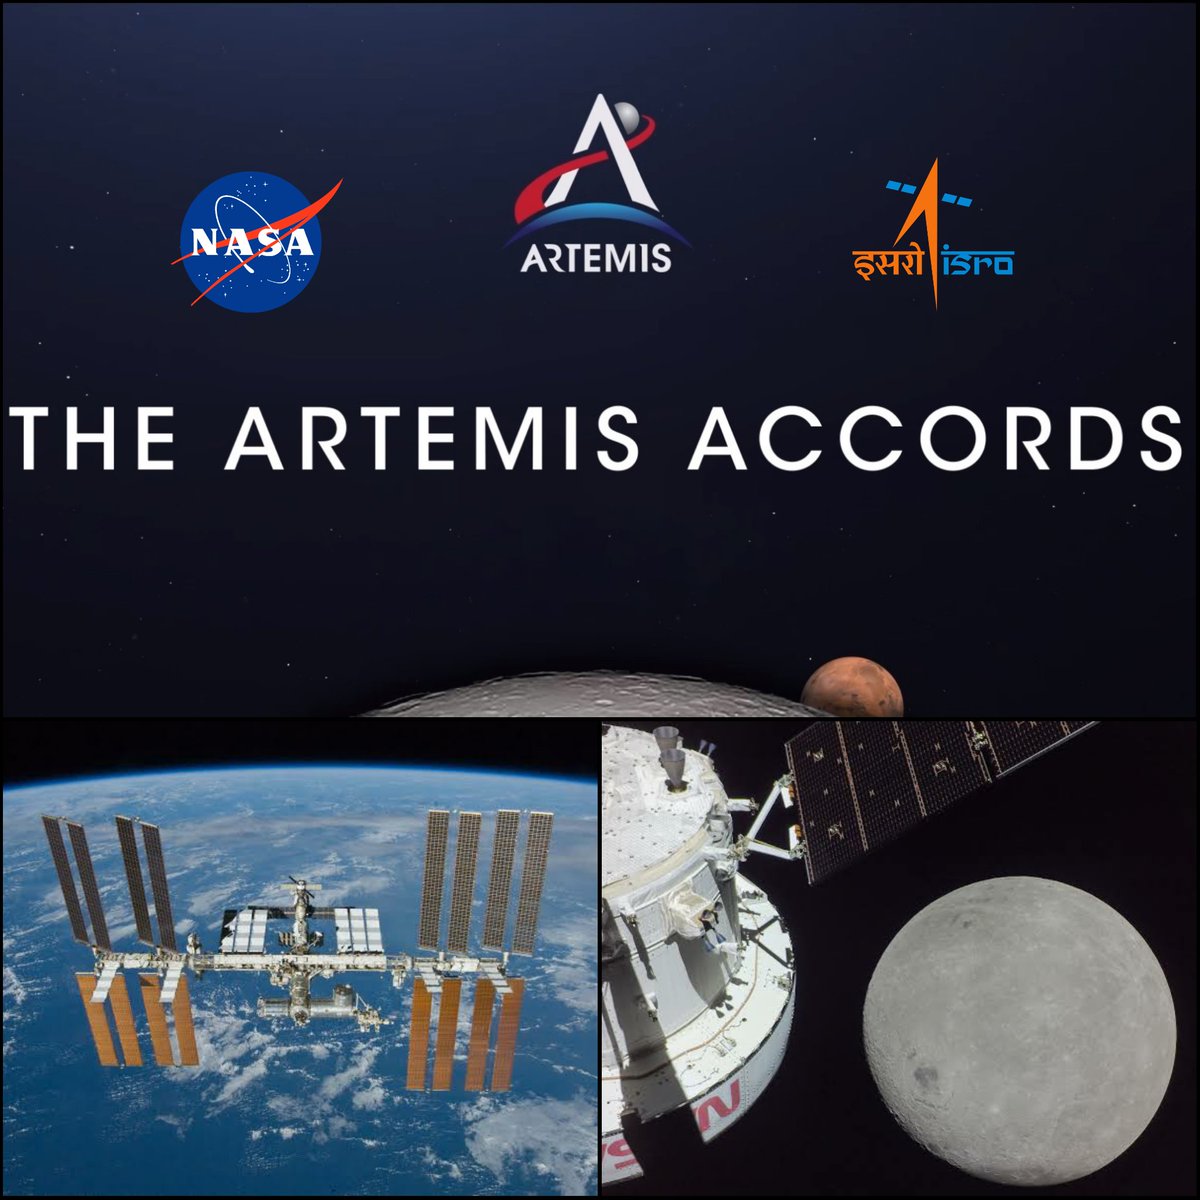 India 🇮🇳 has officially joined the #ArtemisAccords The collaboration between #NASA and #ISRO is taking human space exploration to new heights, as they forge ahead with a cooperative framework for manned missions.